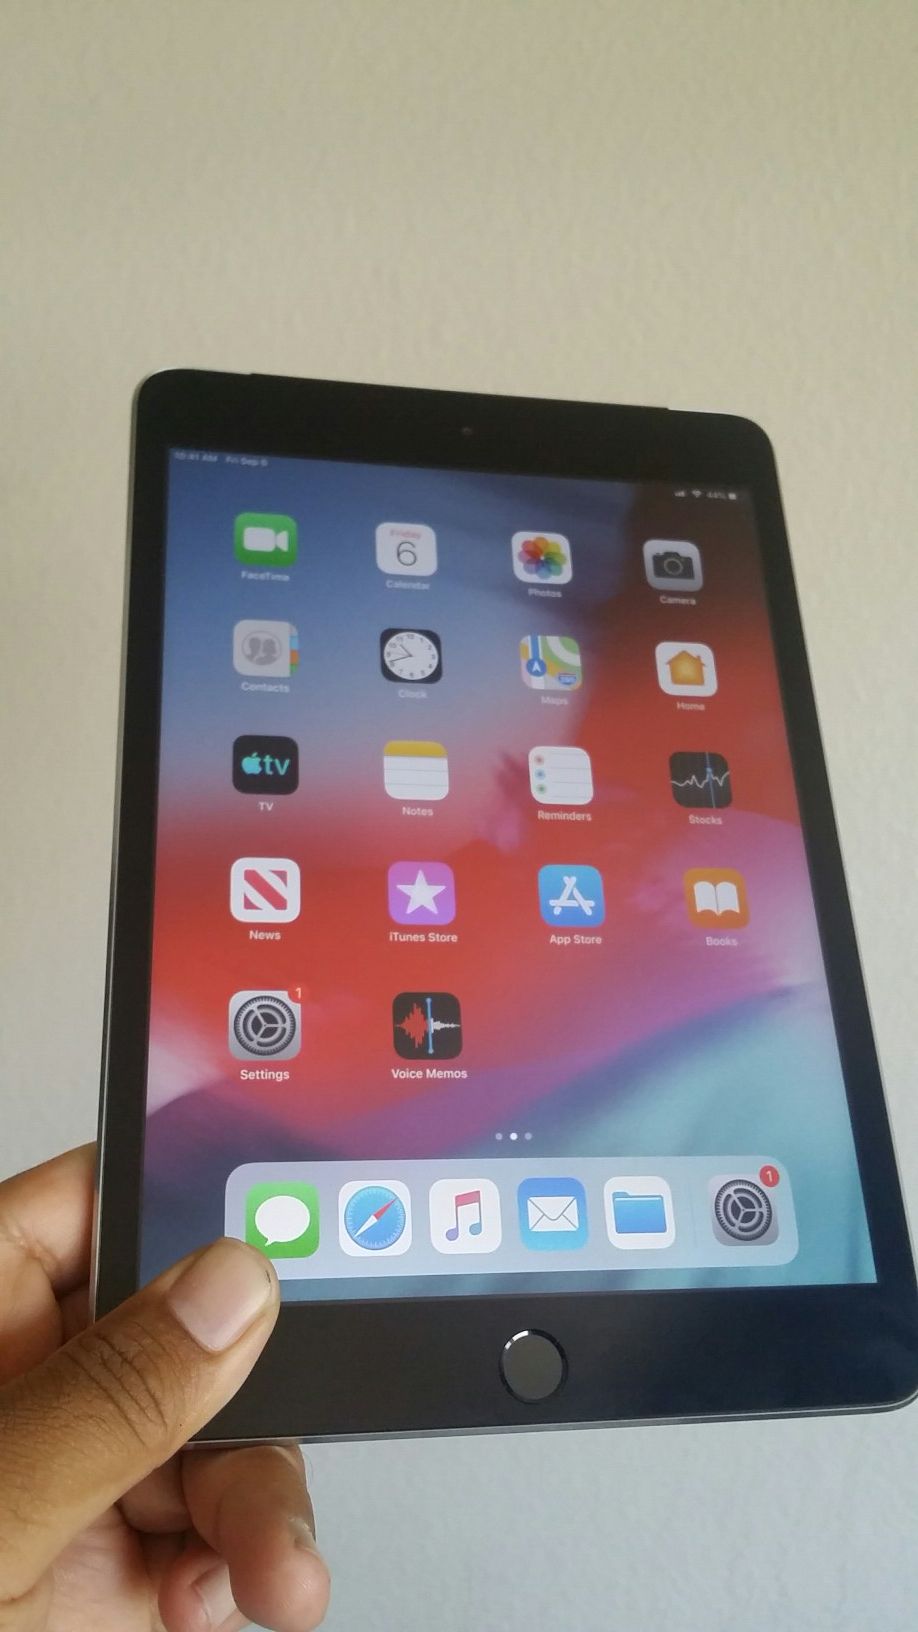 Apple IPad Mini 3 (Retina Display / Touch ID ) 16GB WiFi + Cellular (LTE/ Unlocked) with complete Accessories